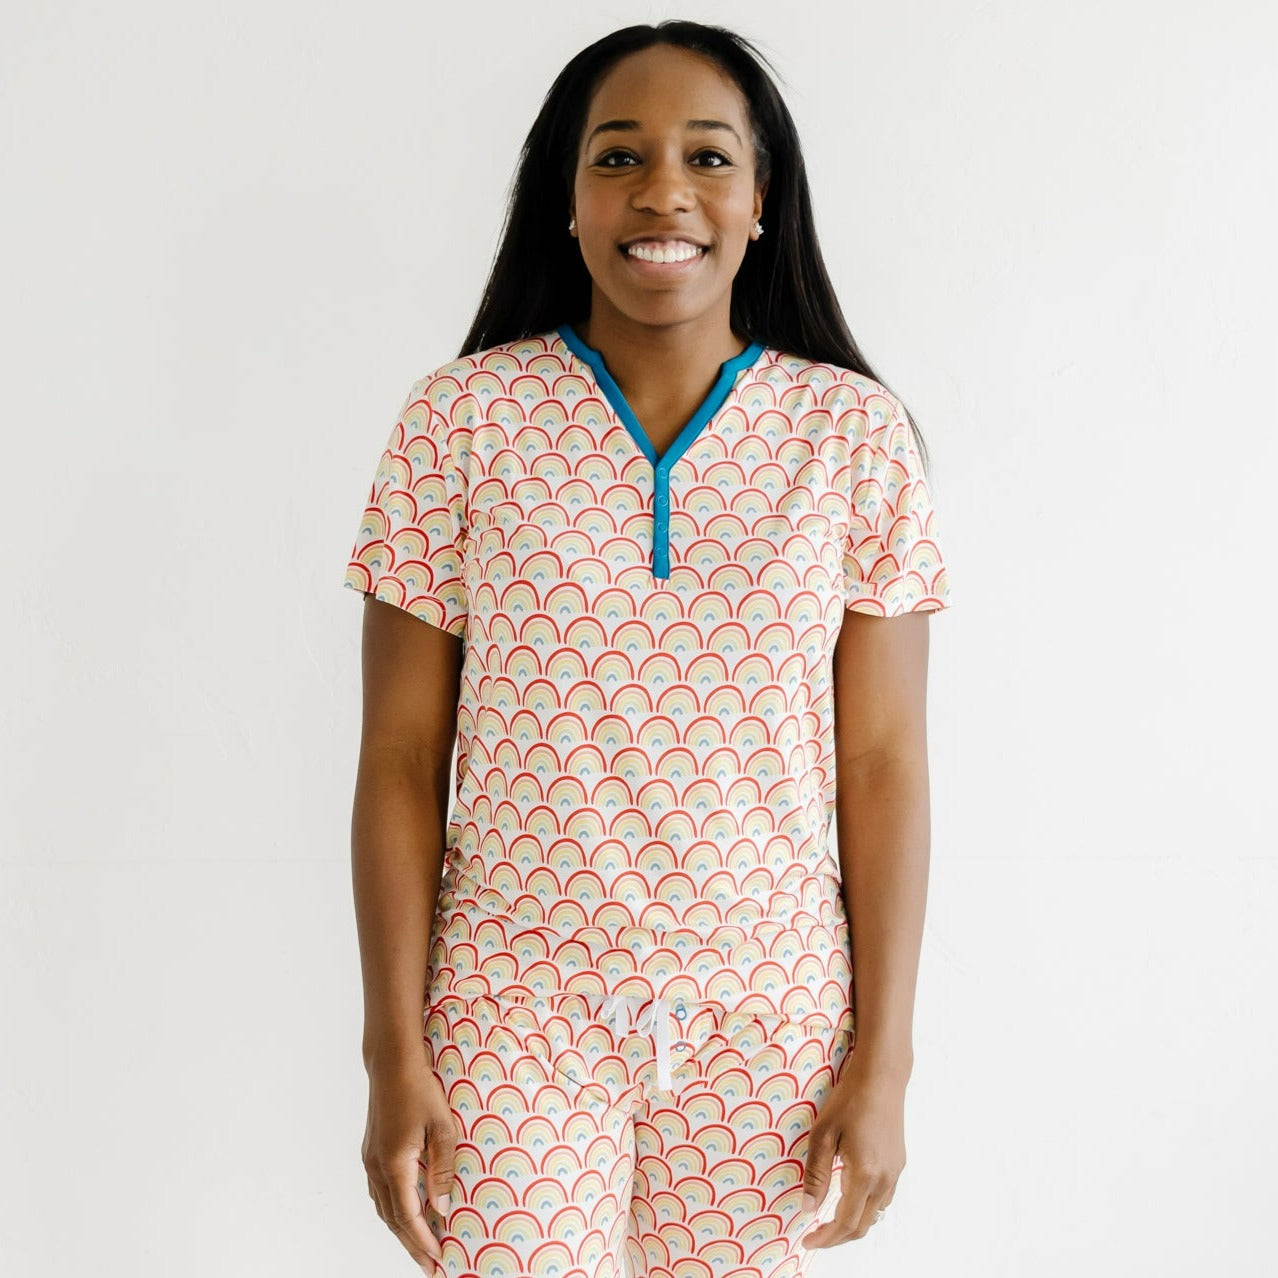 Women's Cotton Nightsuit - Bamboo – S & F Online Store